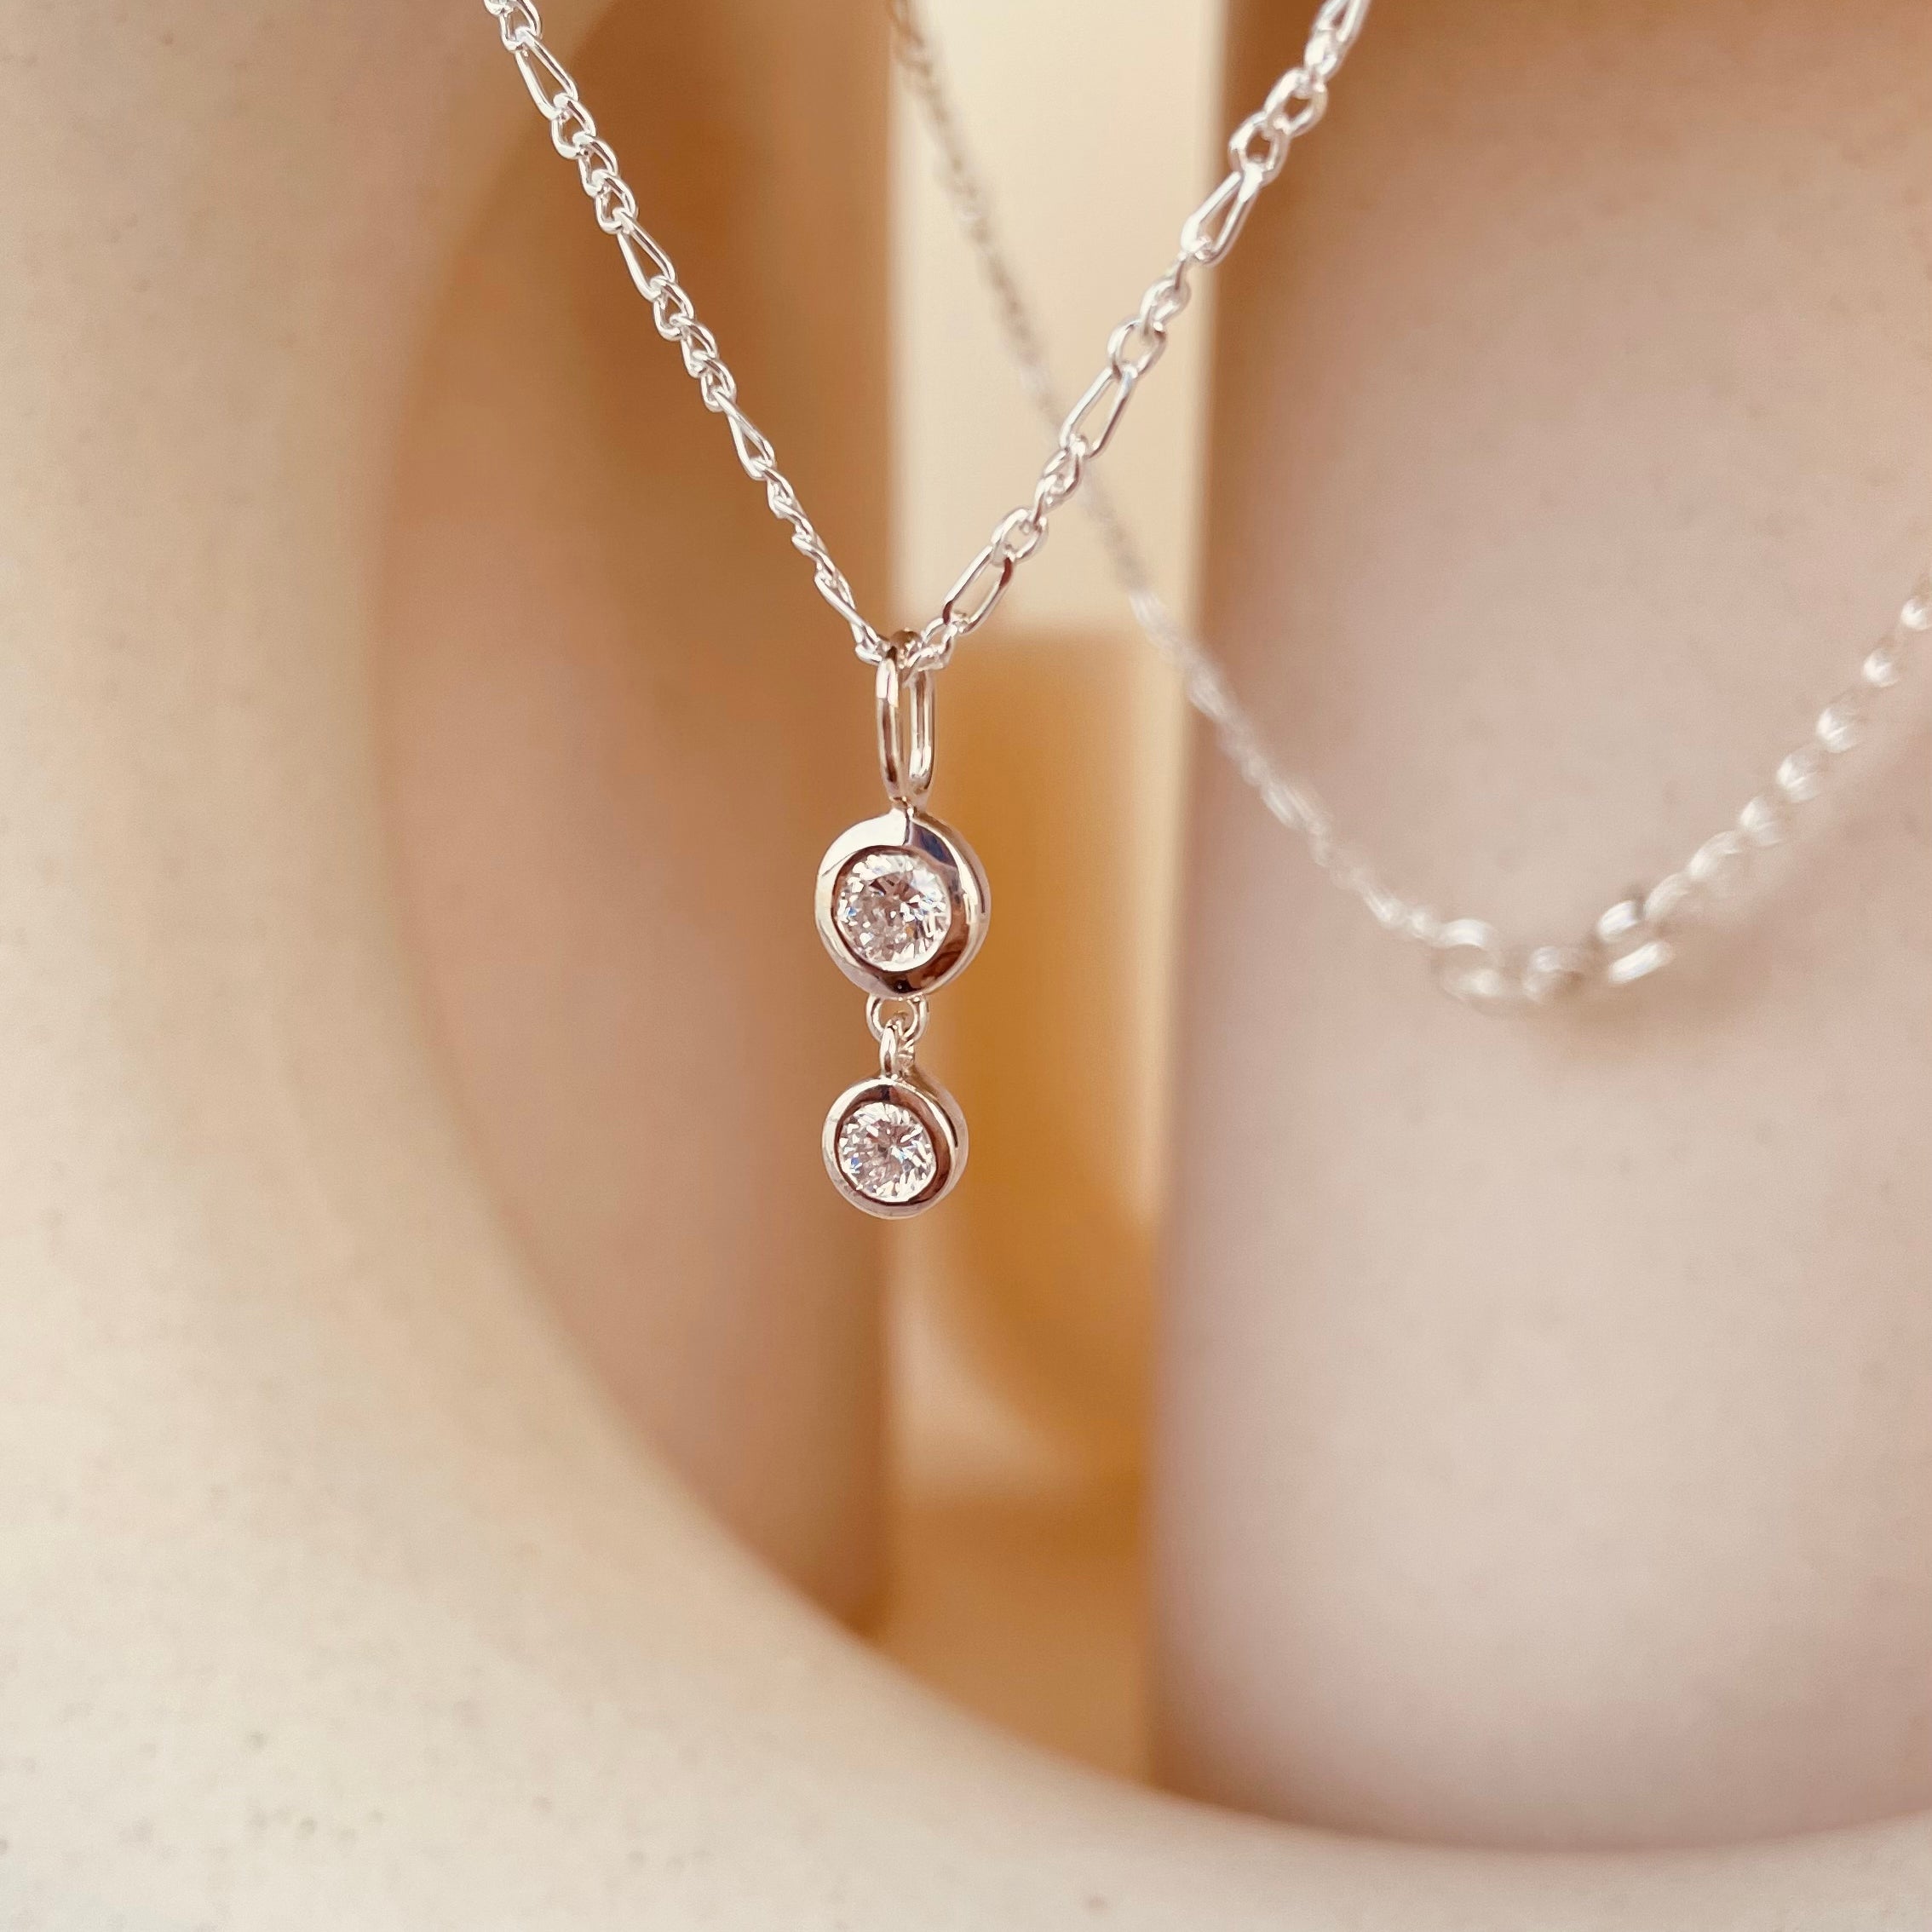 Dainty Double Drop Dangling Necklace with Figaro Chain - Octonov 